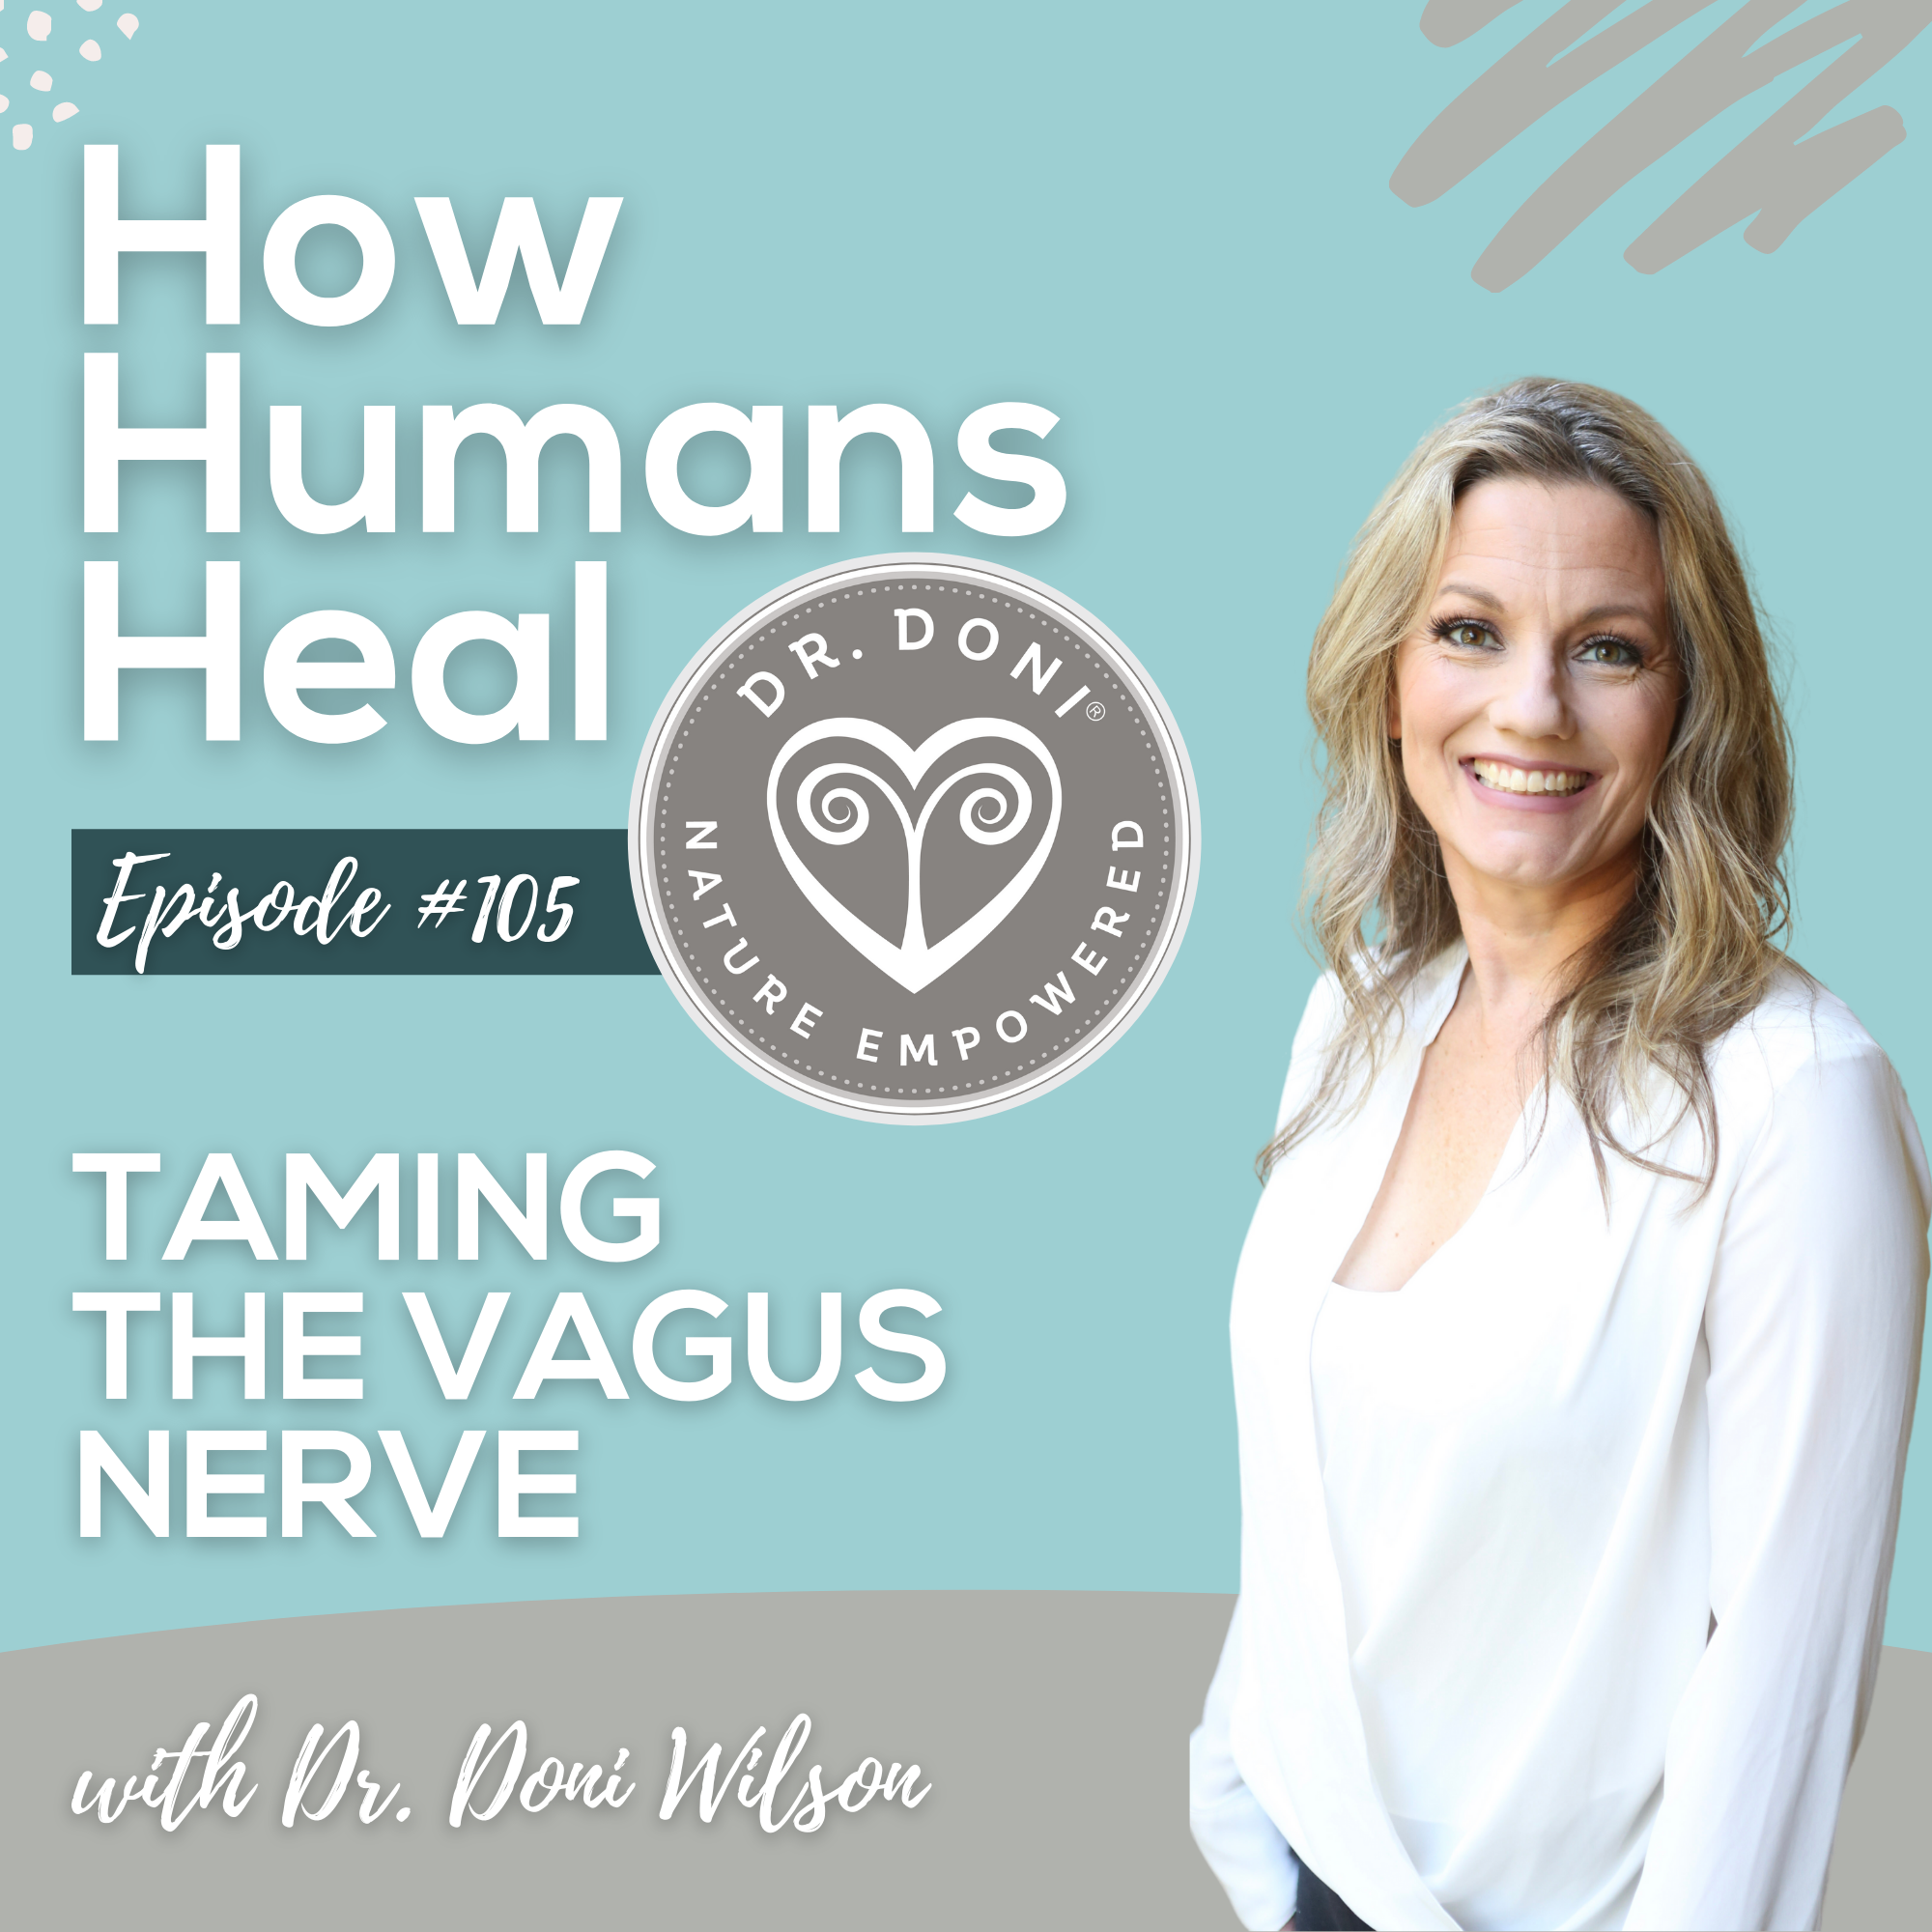 Dr. Doni explains how we help our vagus nerve to recover from stress.